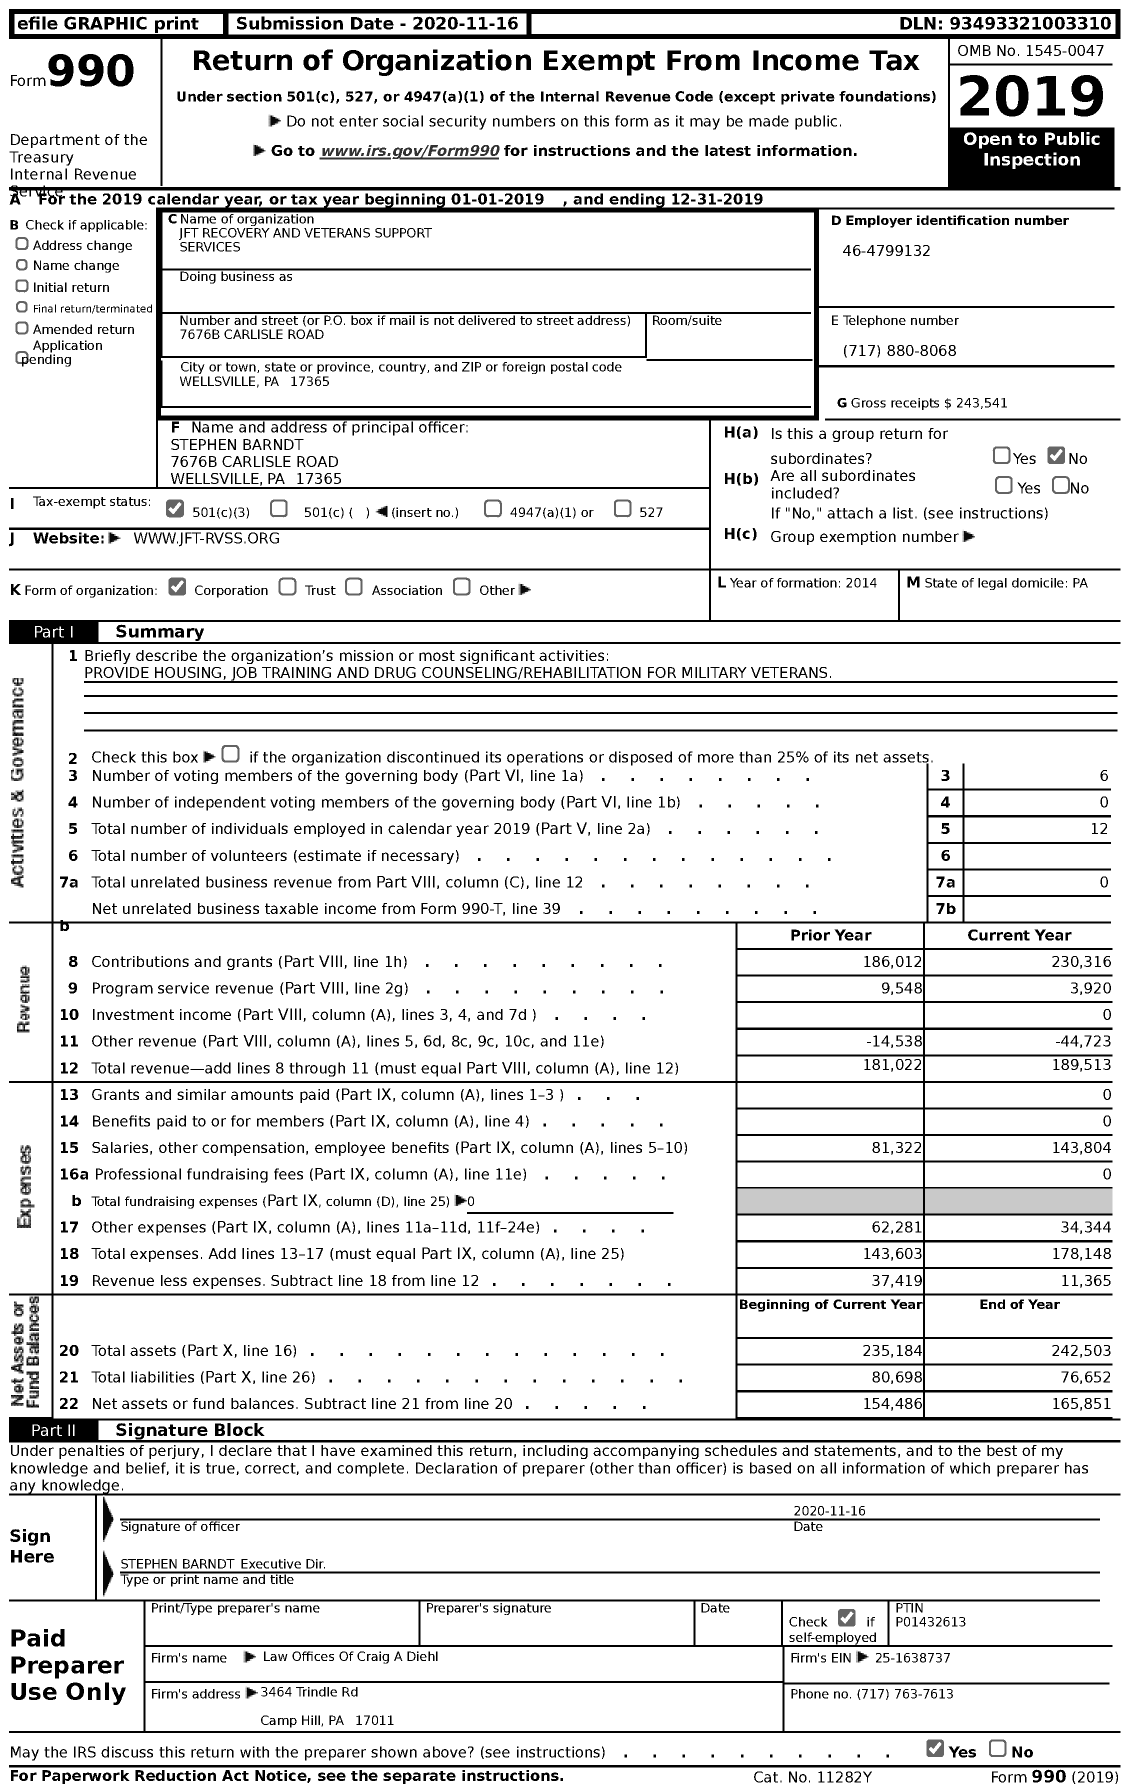 Image of first page of 2019 Form 990 for JFT Recovery and Veterans Support Services